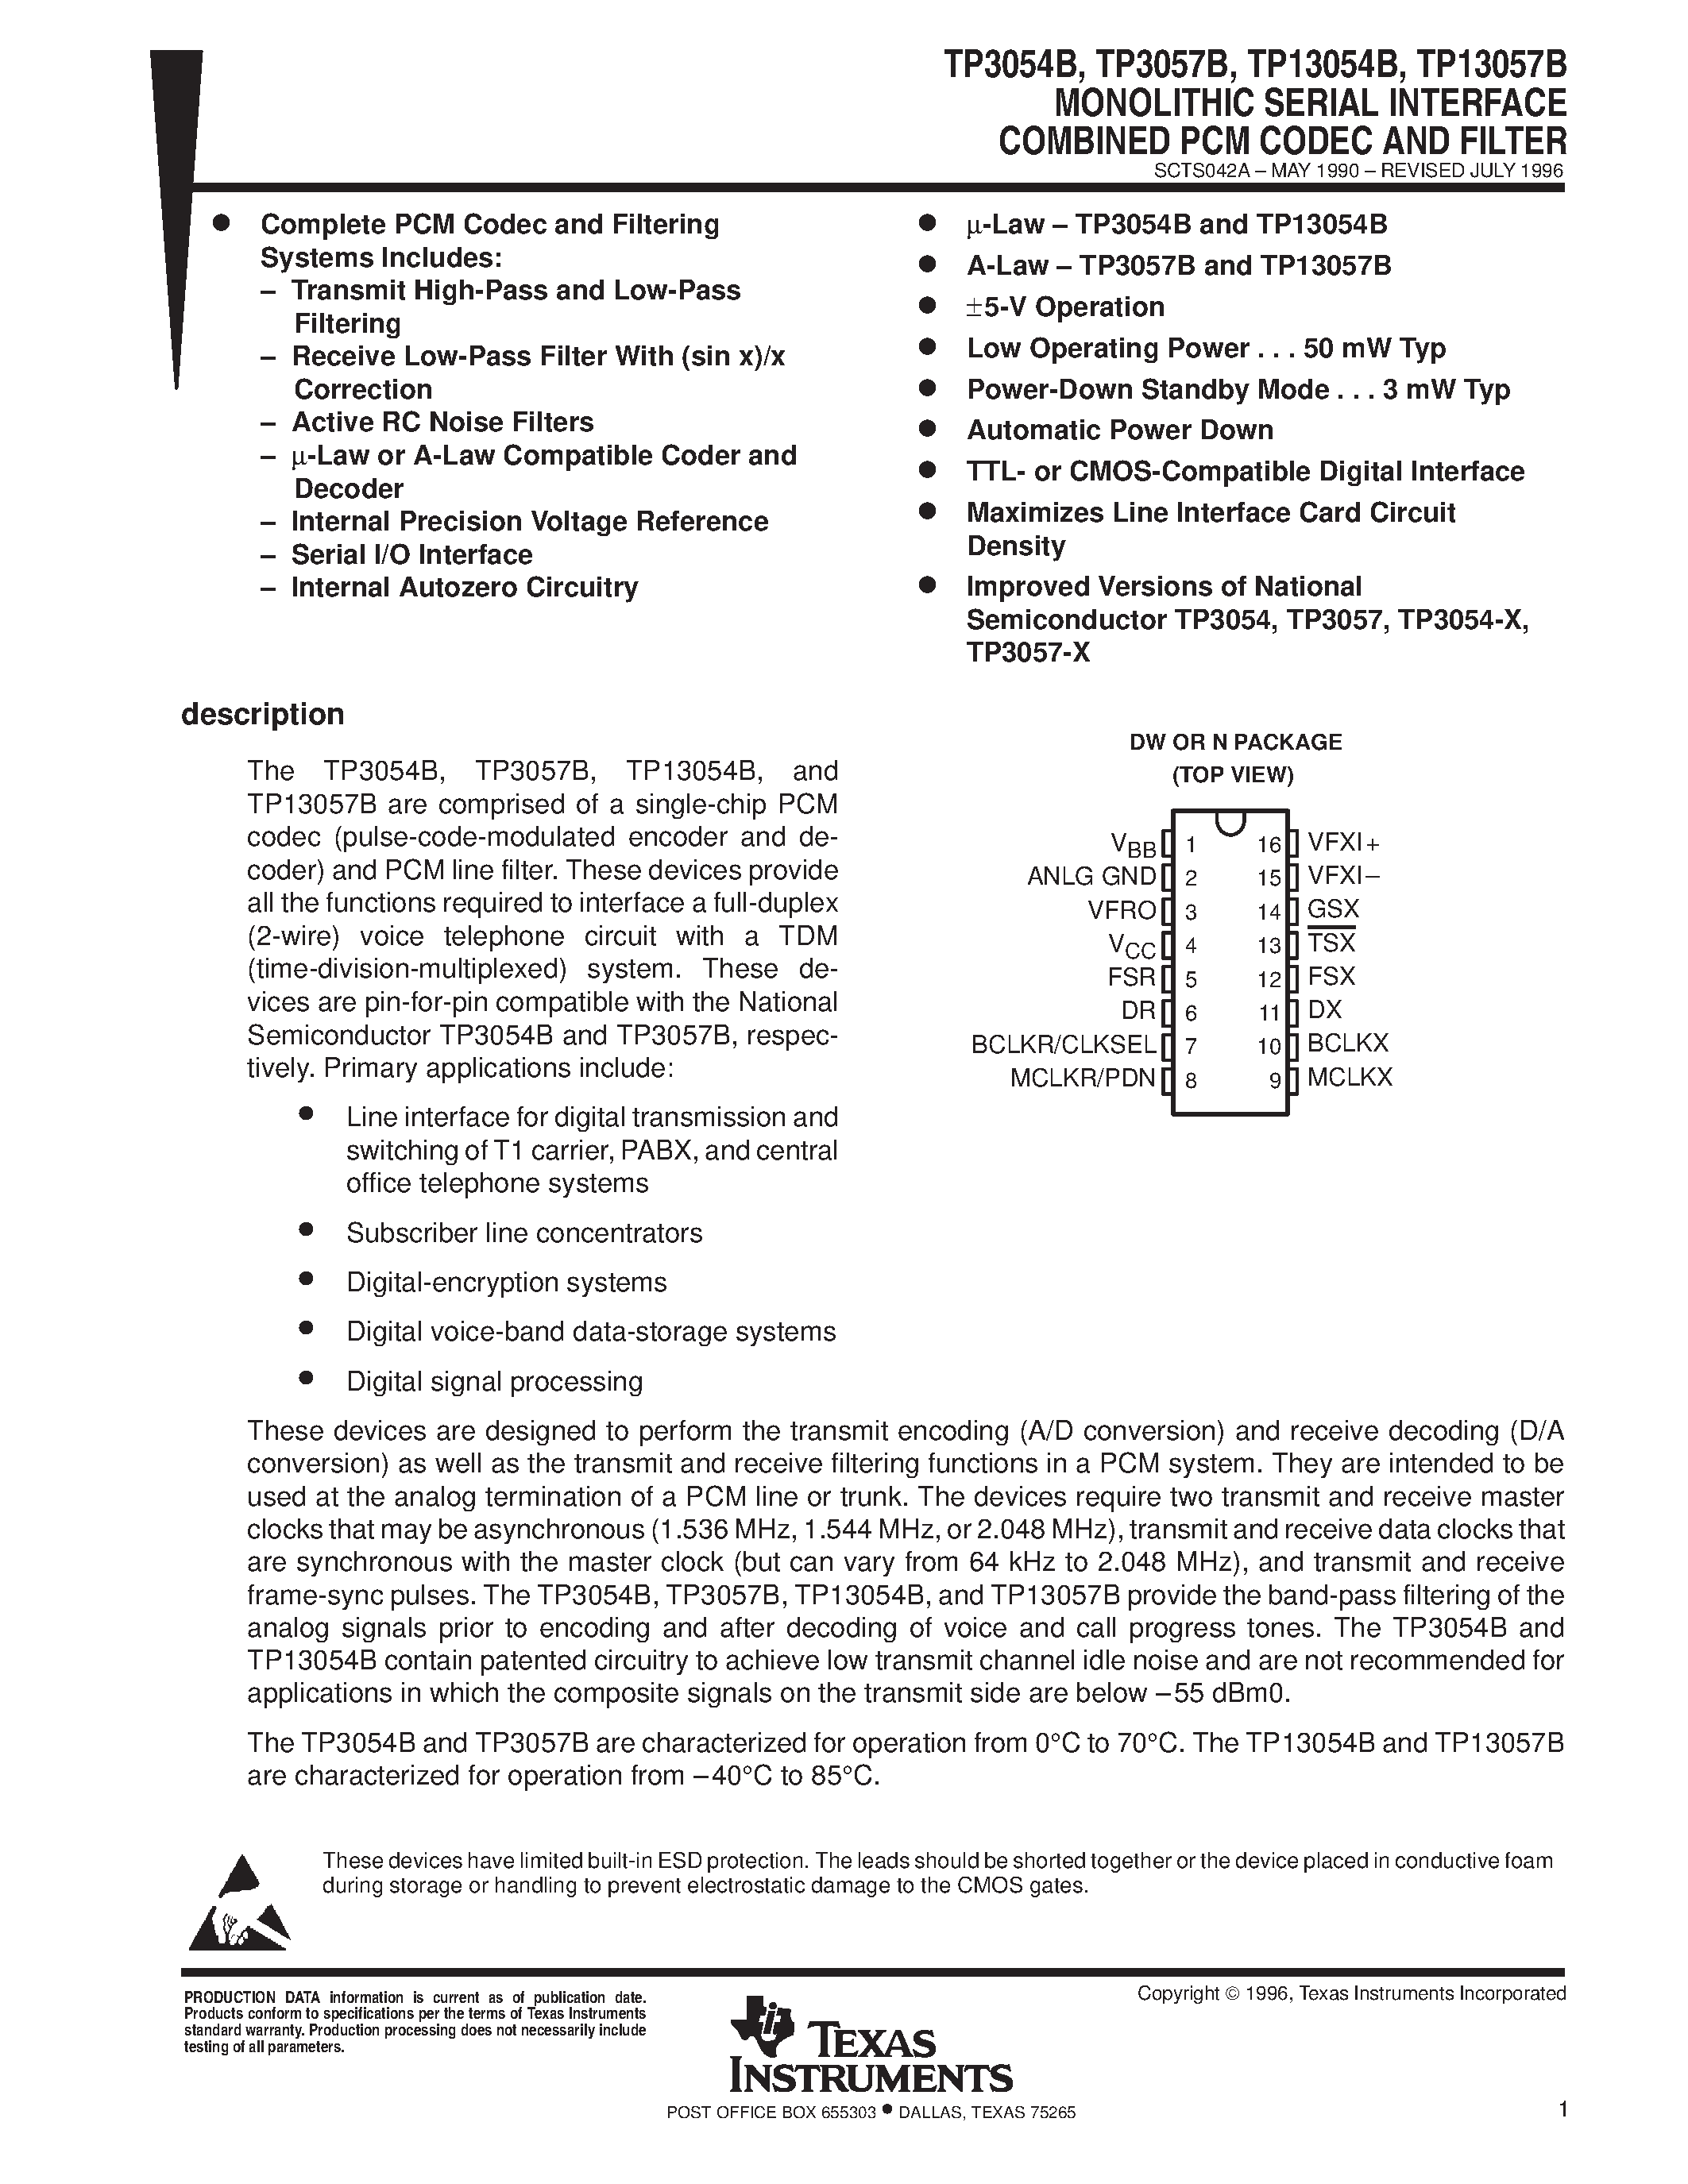 Datasheet TP13054BN - MONOLITHIC SERIAL INTERFACE COMBINED PCM CODEC AND FILTER page 1